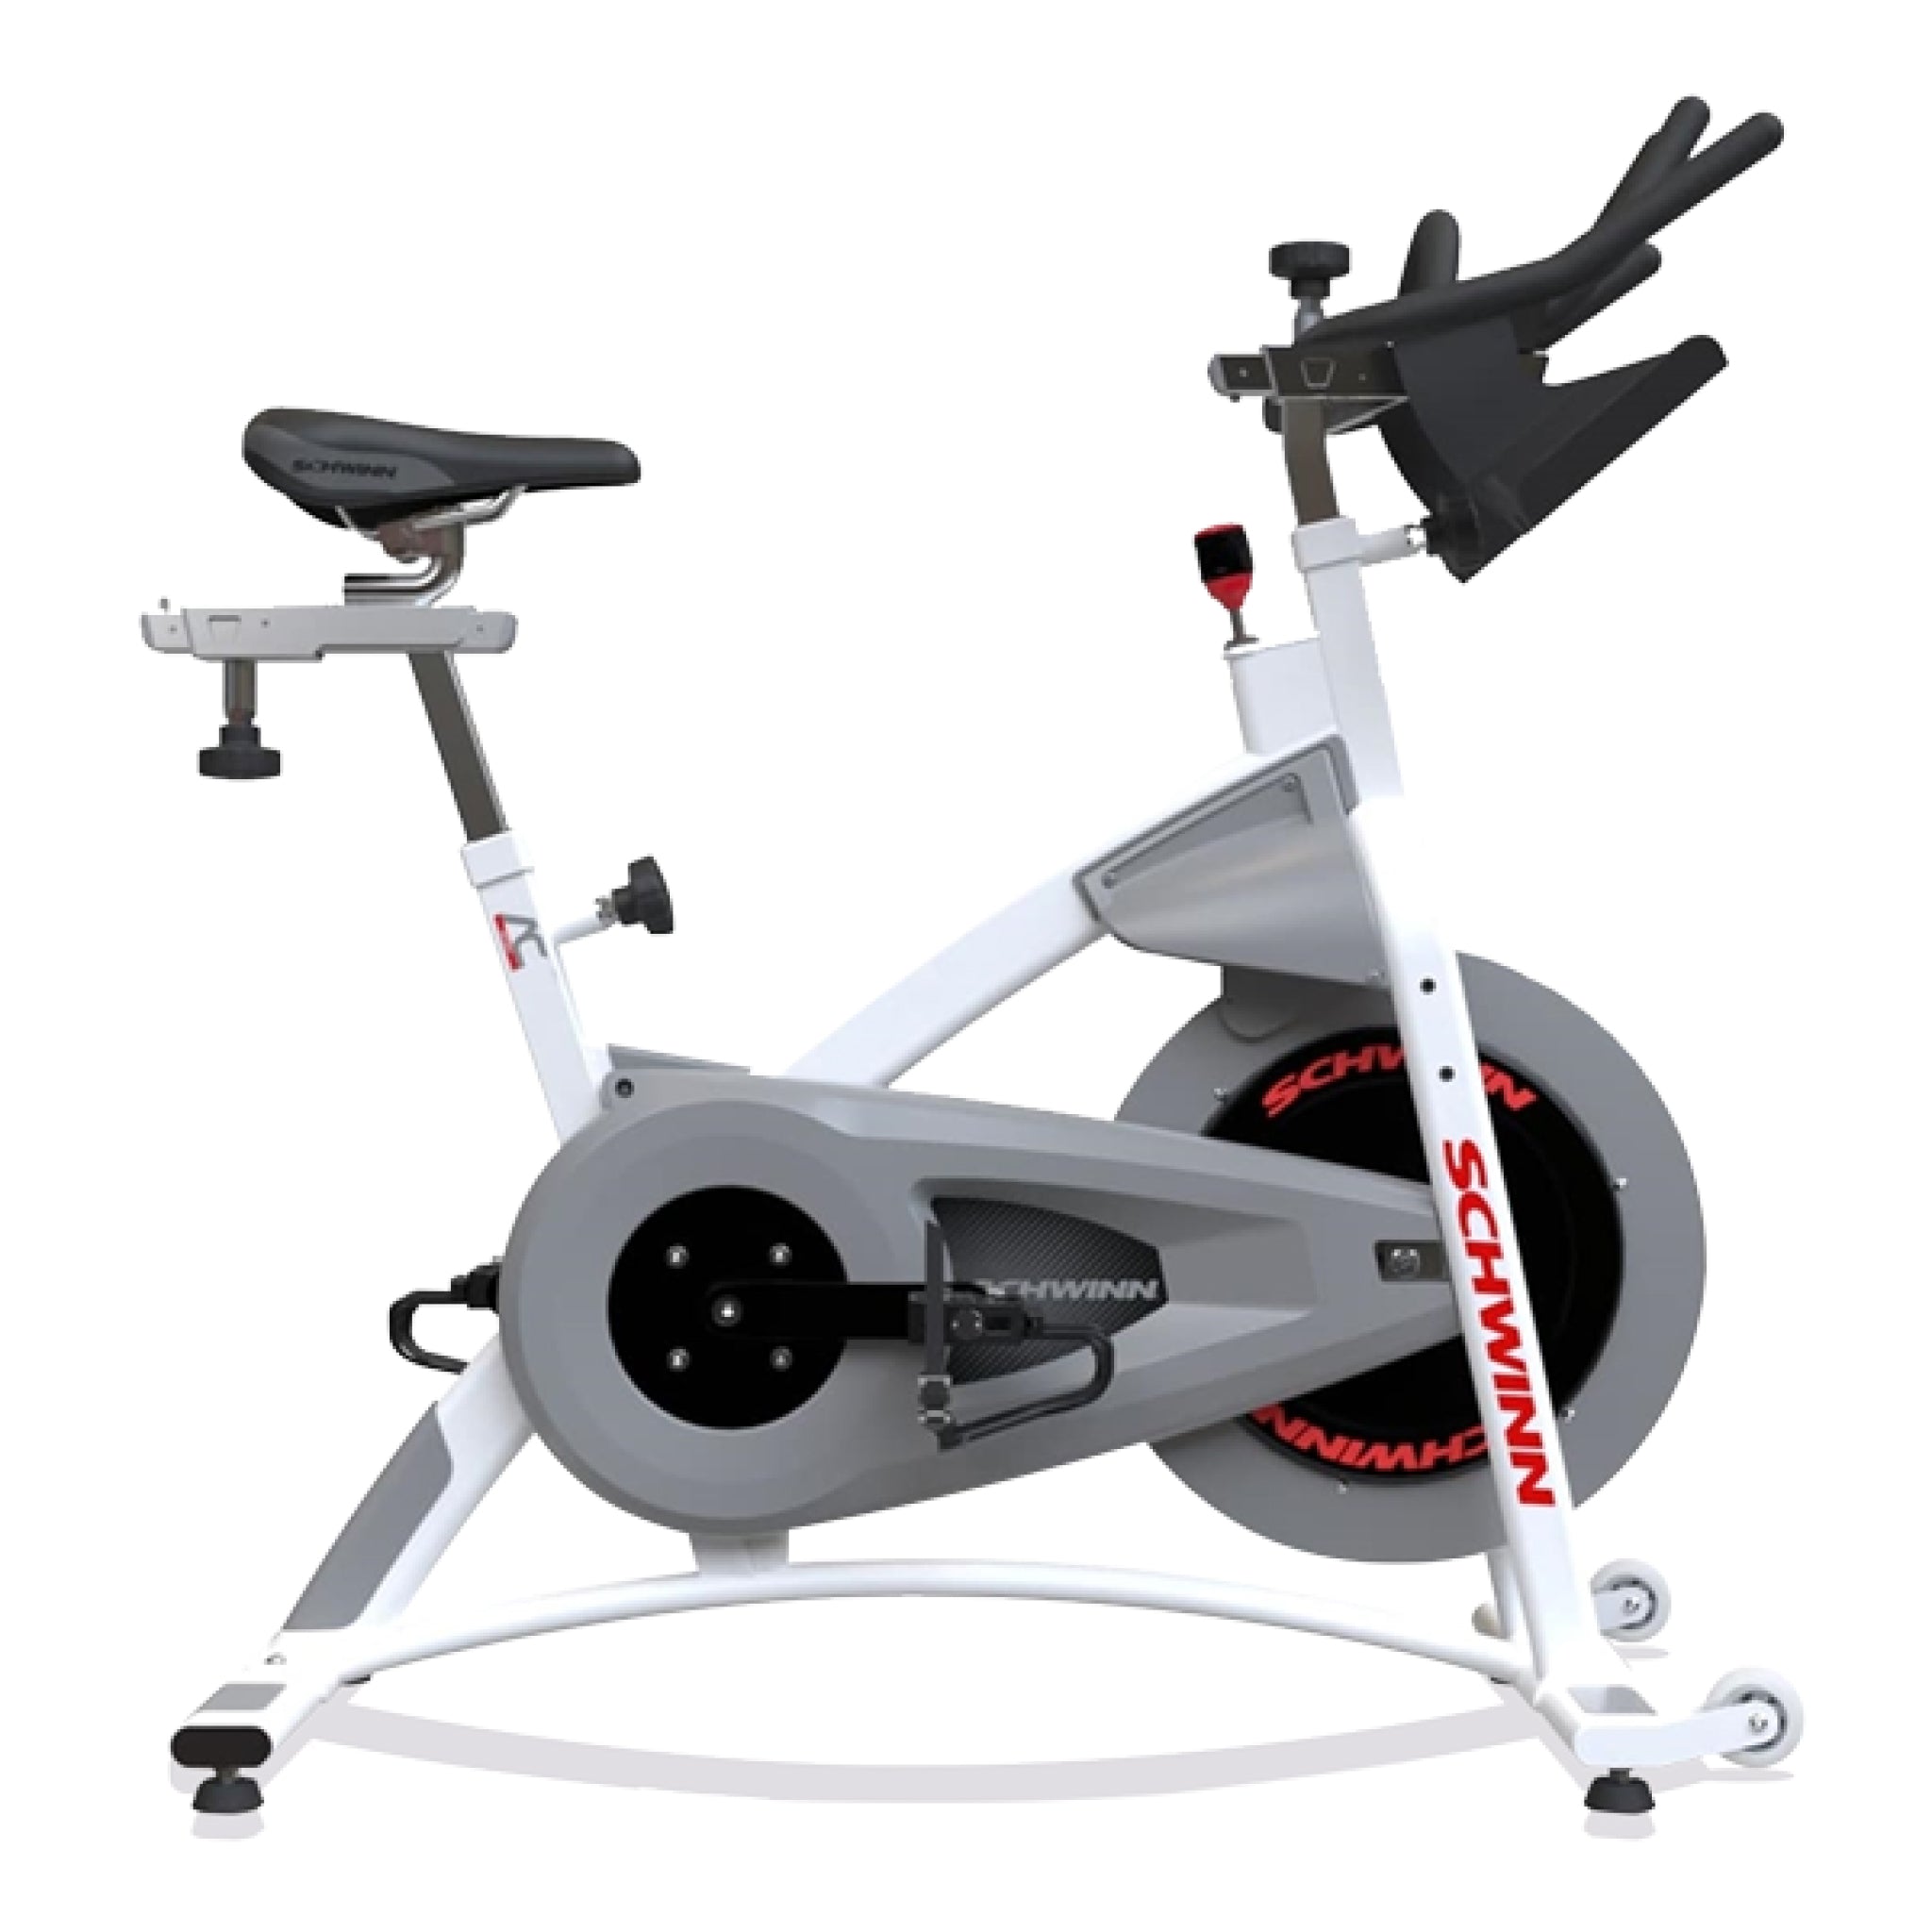 Lefthand view of the Schwinn A.C. Sport Indoor Cycle Trainer, Silver